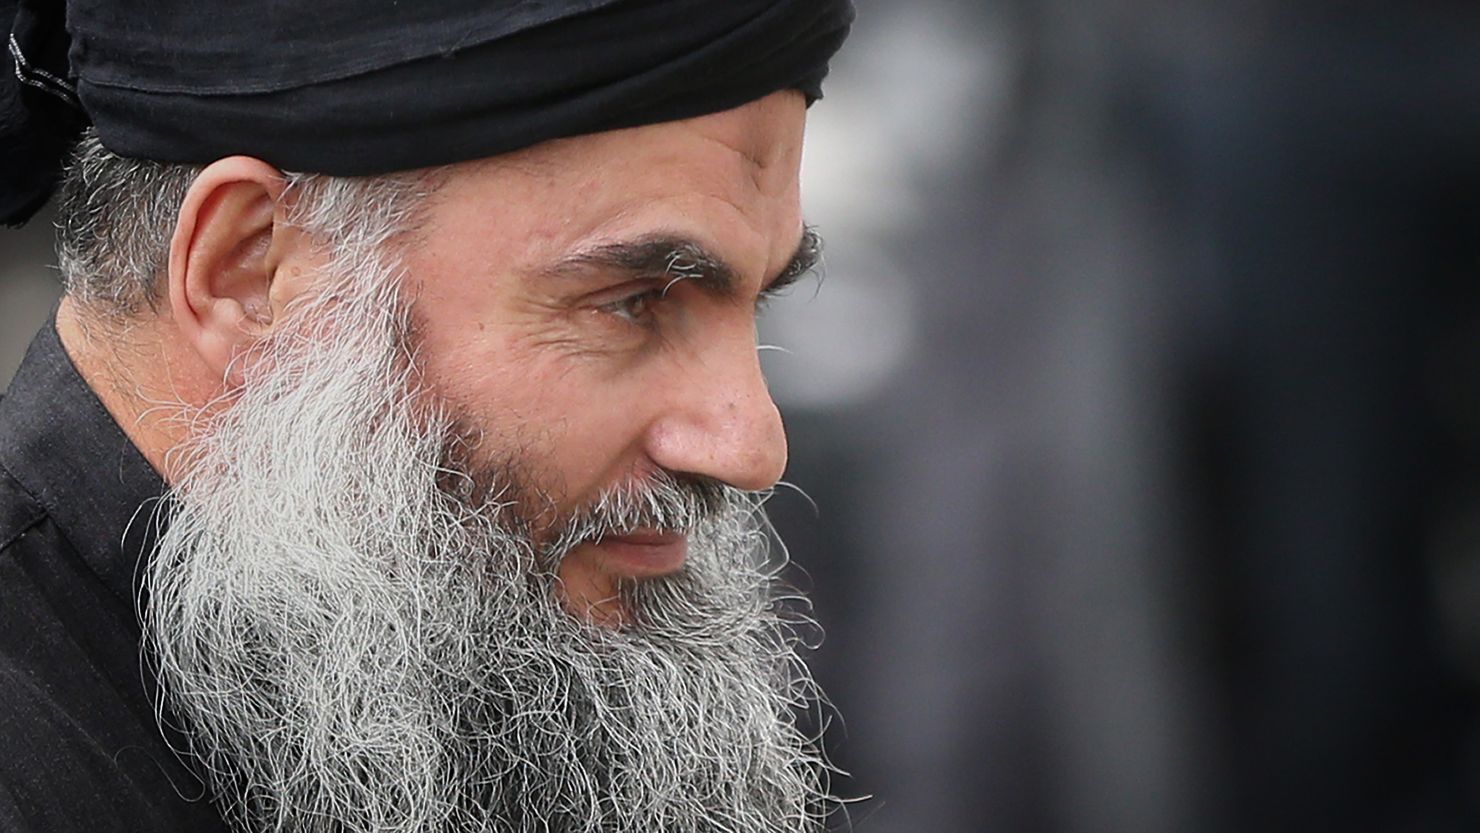 Muslim Cleric Abu Qatada arrives home after being released from prison on November 13  in London, England.